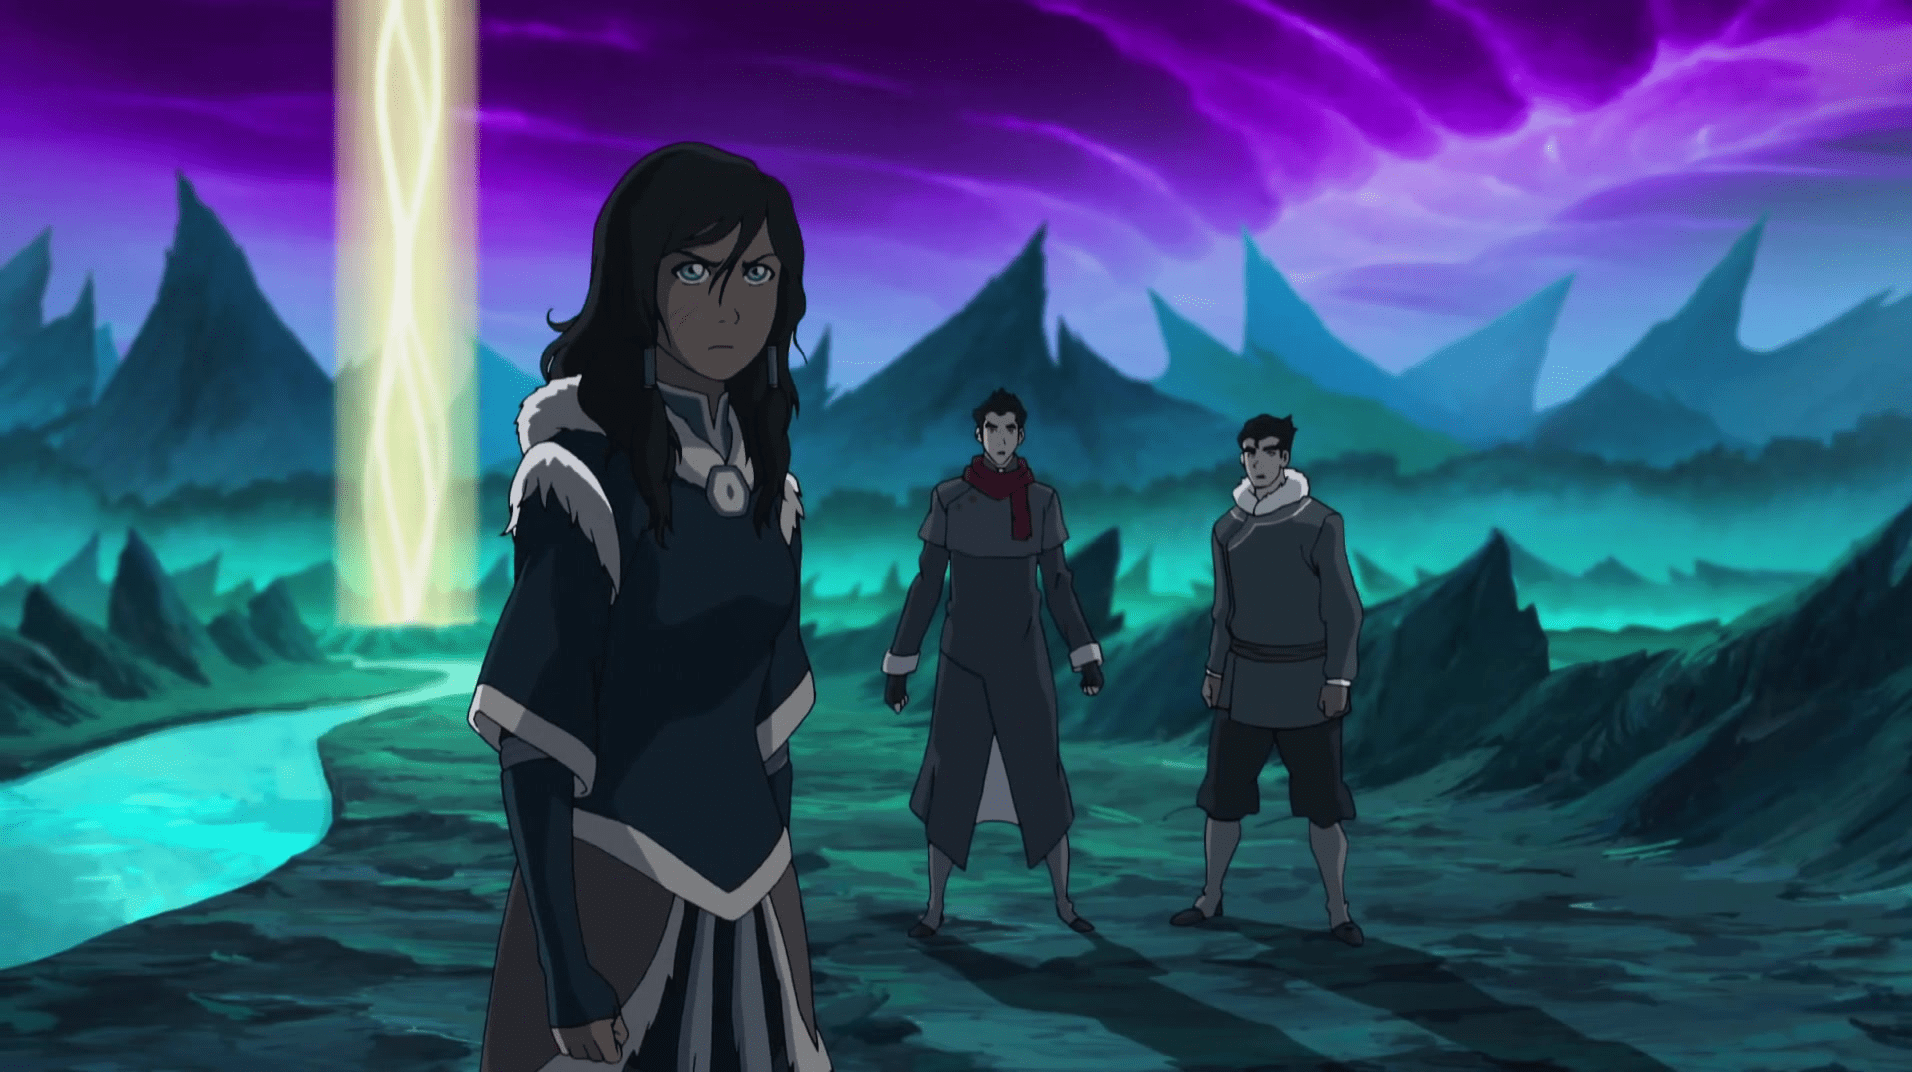 Korra faces a gruelling battle for the fate of the Spirit and Physical worlds. (Image: Nickelodeon)